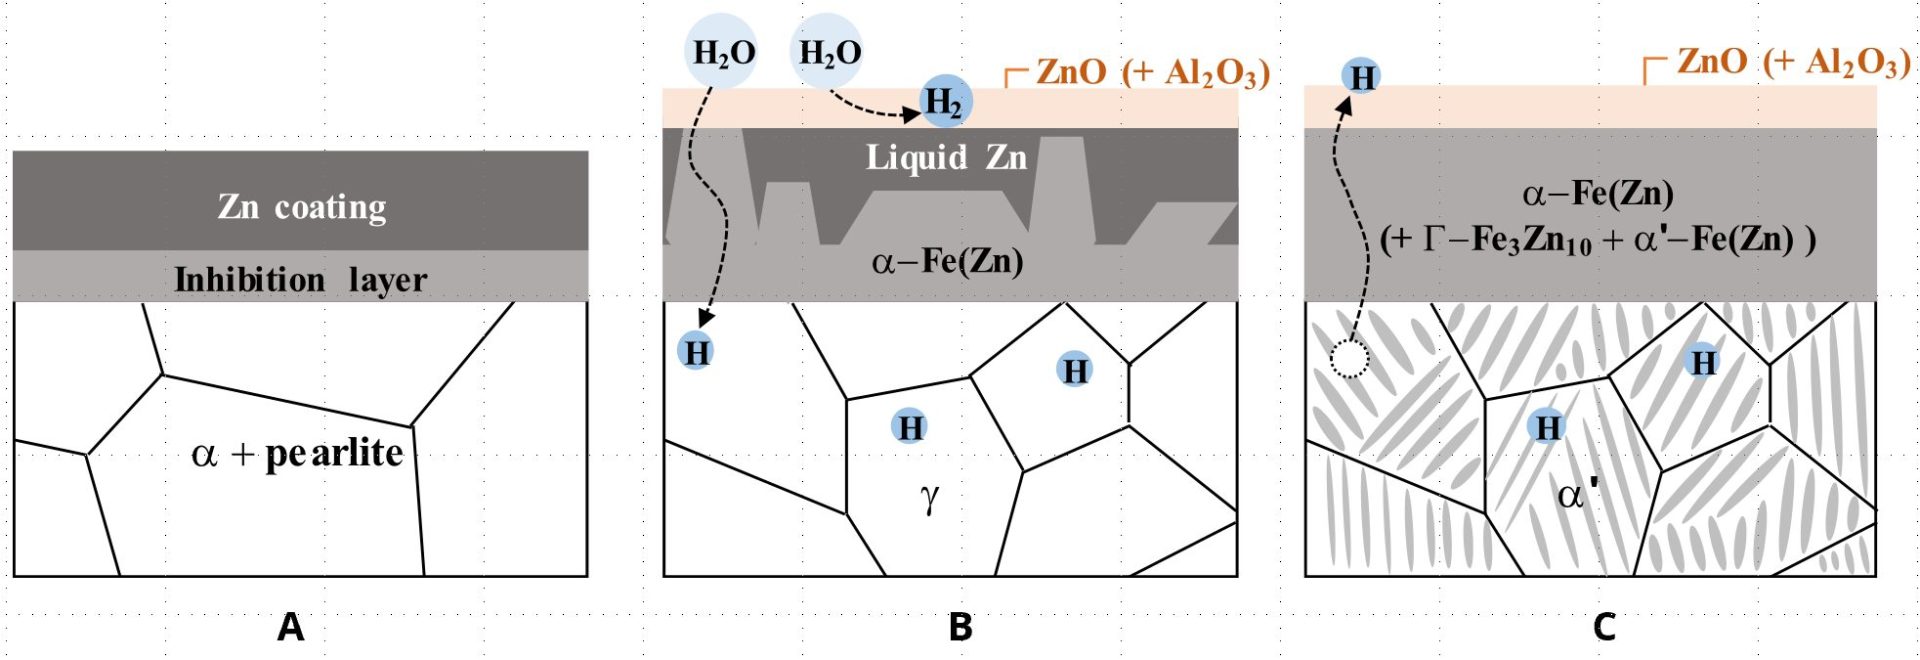 Figure 10: Evolution of galvanized coating: (a) as delivered: Ferrite+Pearlite in base metal, almost pure Zn coating with Al-rich inhibition layer, (b) at high temperatures: austenite in base metal + α-Fe(Zn) and liquid Zn + surface oxides, (c) after press hardening: martensite in base metal + α-Fe(Zn) and Γ-phase coatings + surface oxides. The oxides are removed prior to welding and painting [REFERENCE 30]